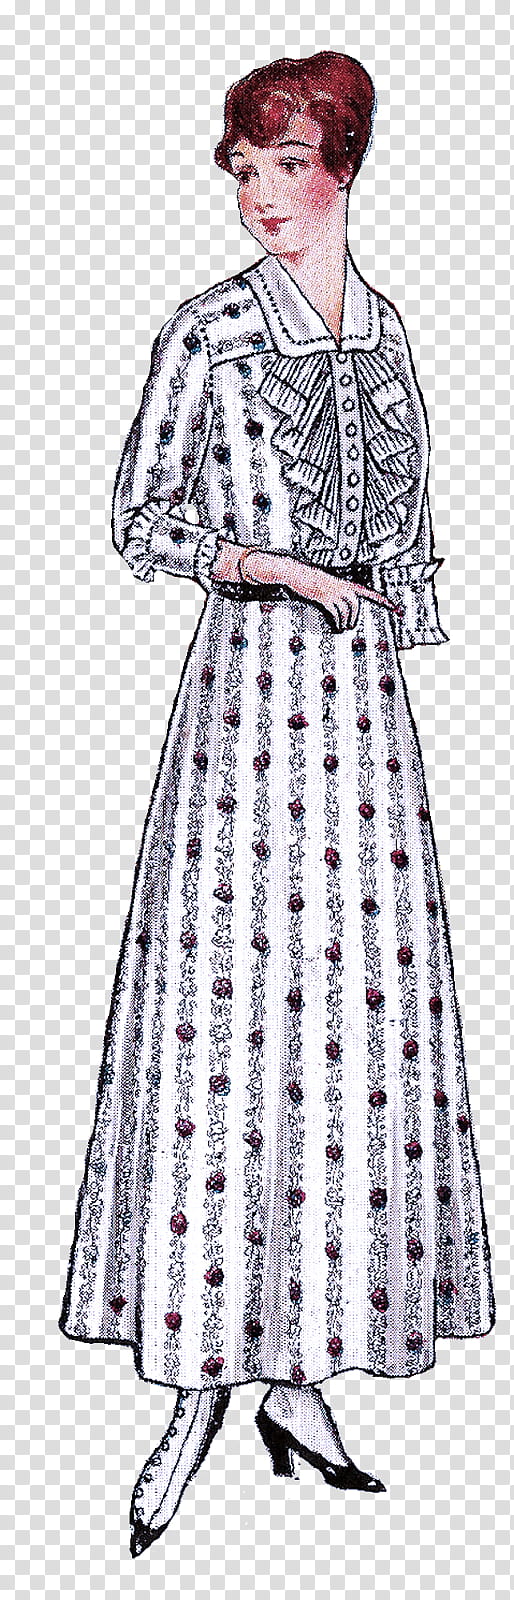 clothing dress white day dress gown, Sleeve, Outerwear, Costume Design, Aline, Victorian Fashion transparent background PNG clipart